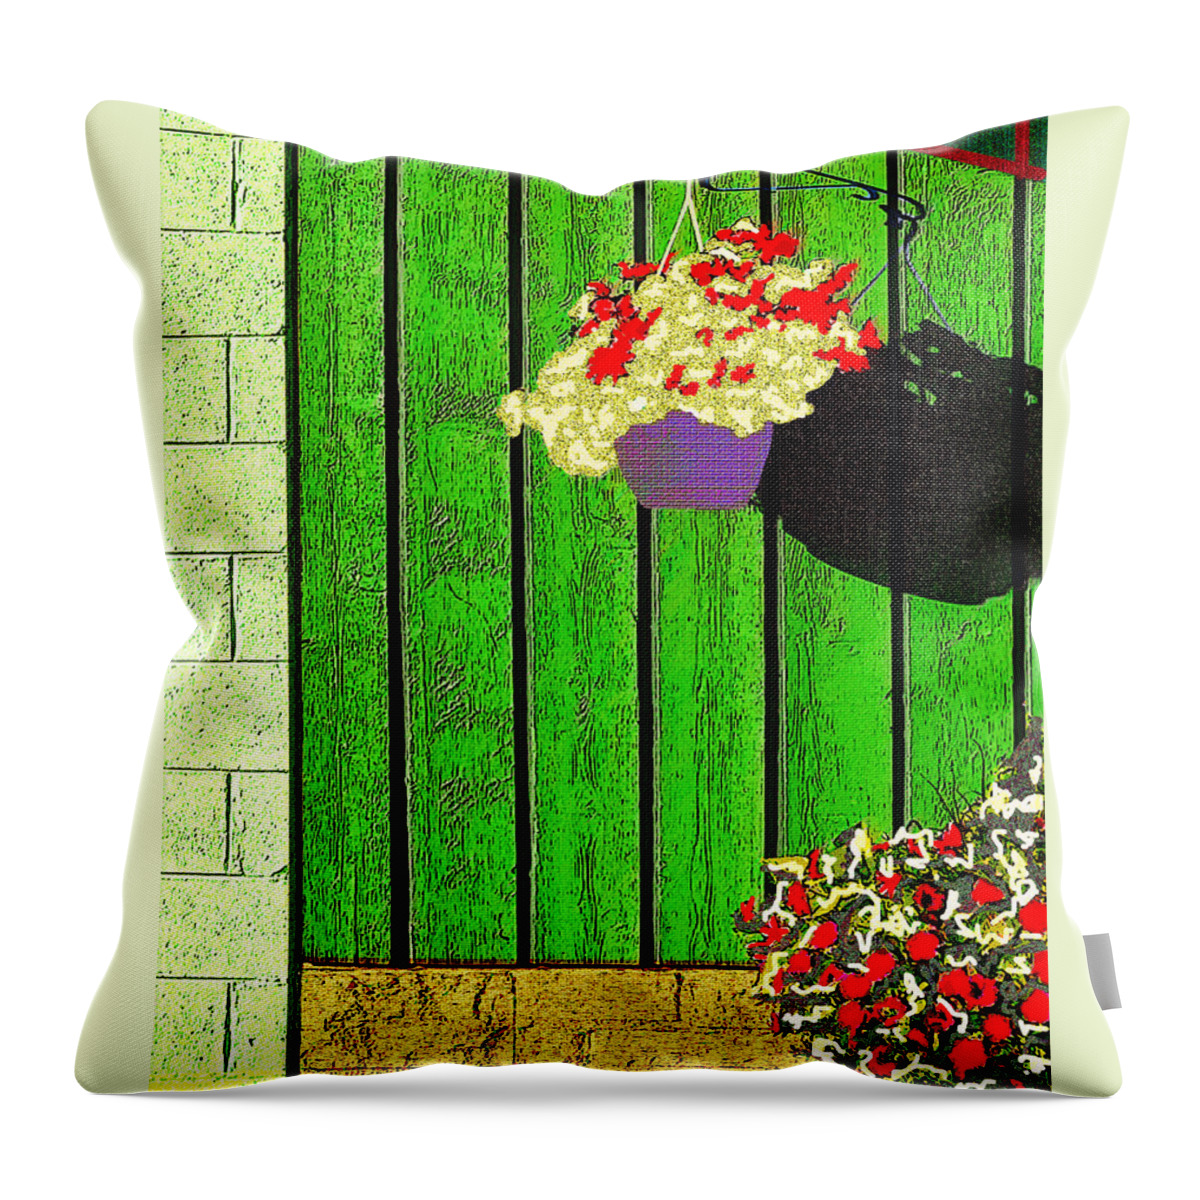 Fauvism Throw Pillow featuring the digital art Green Wall by Rod Whyte